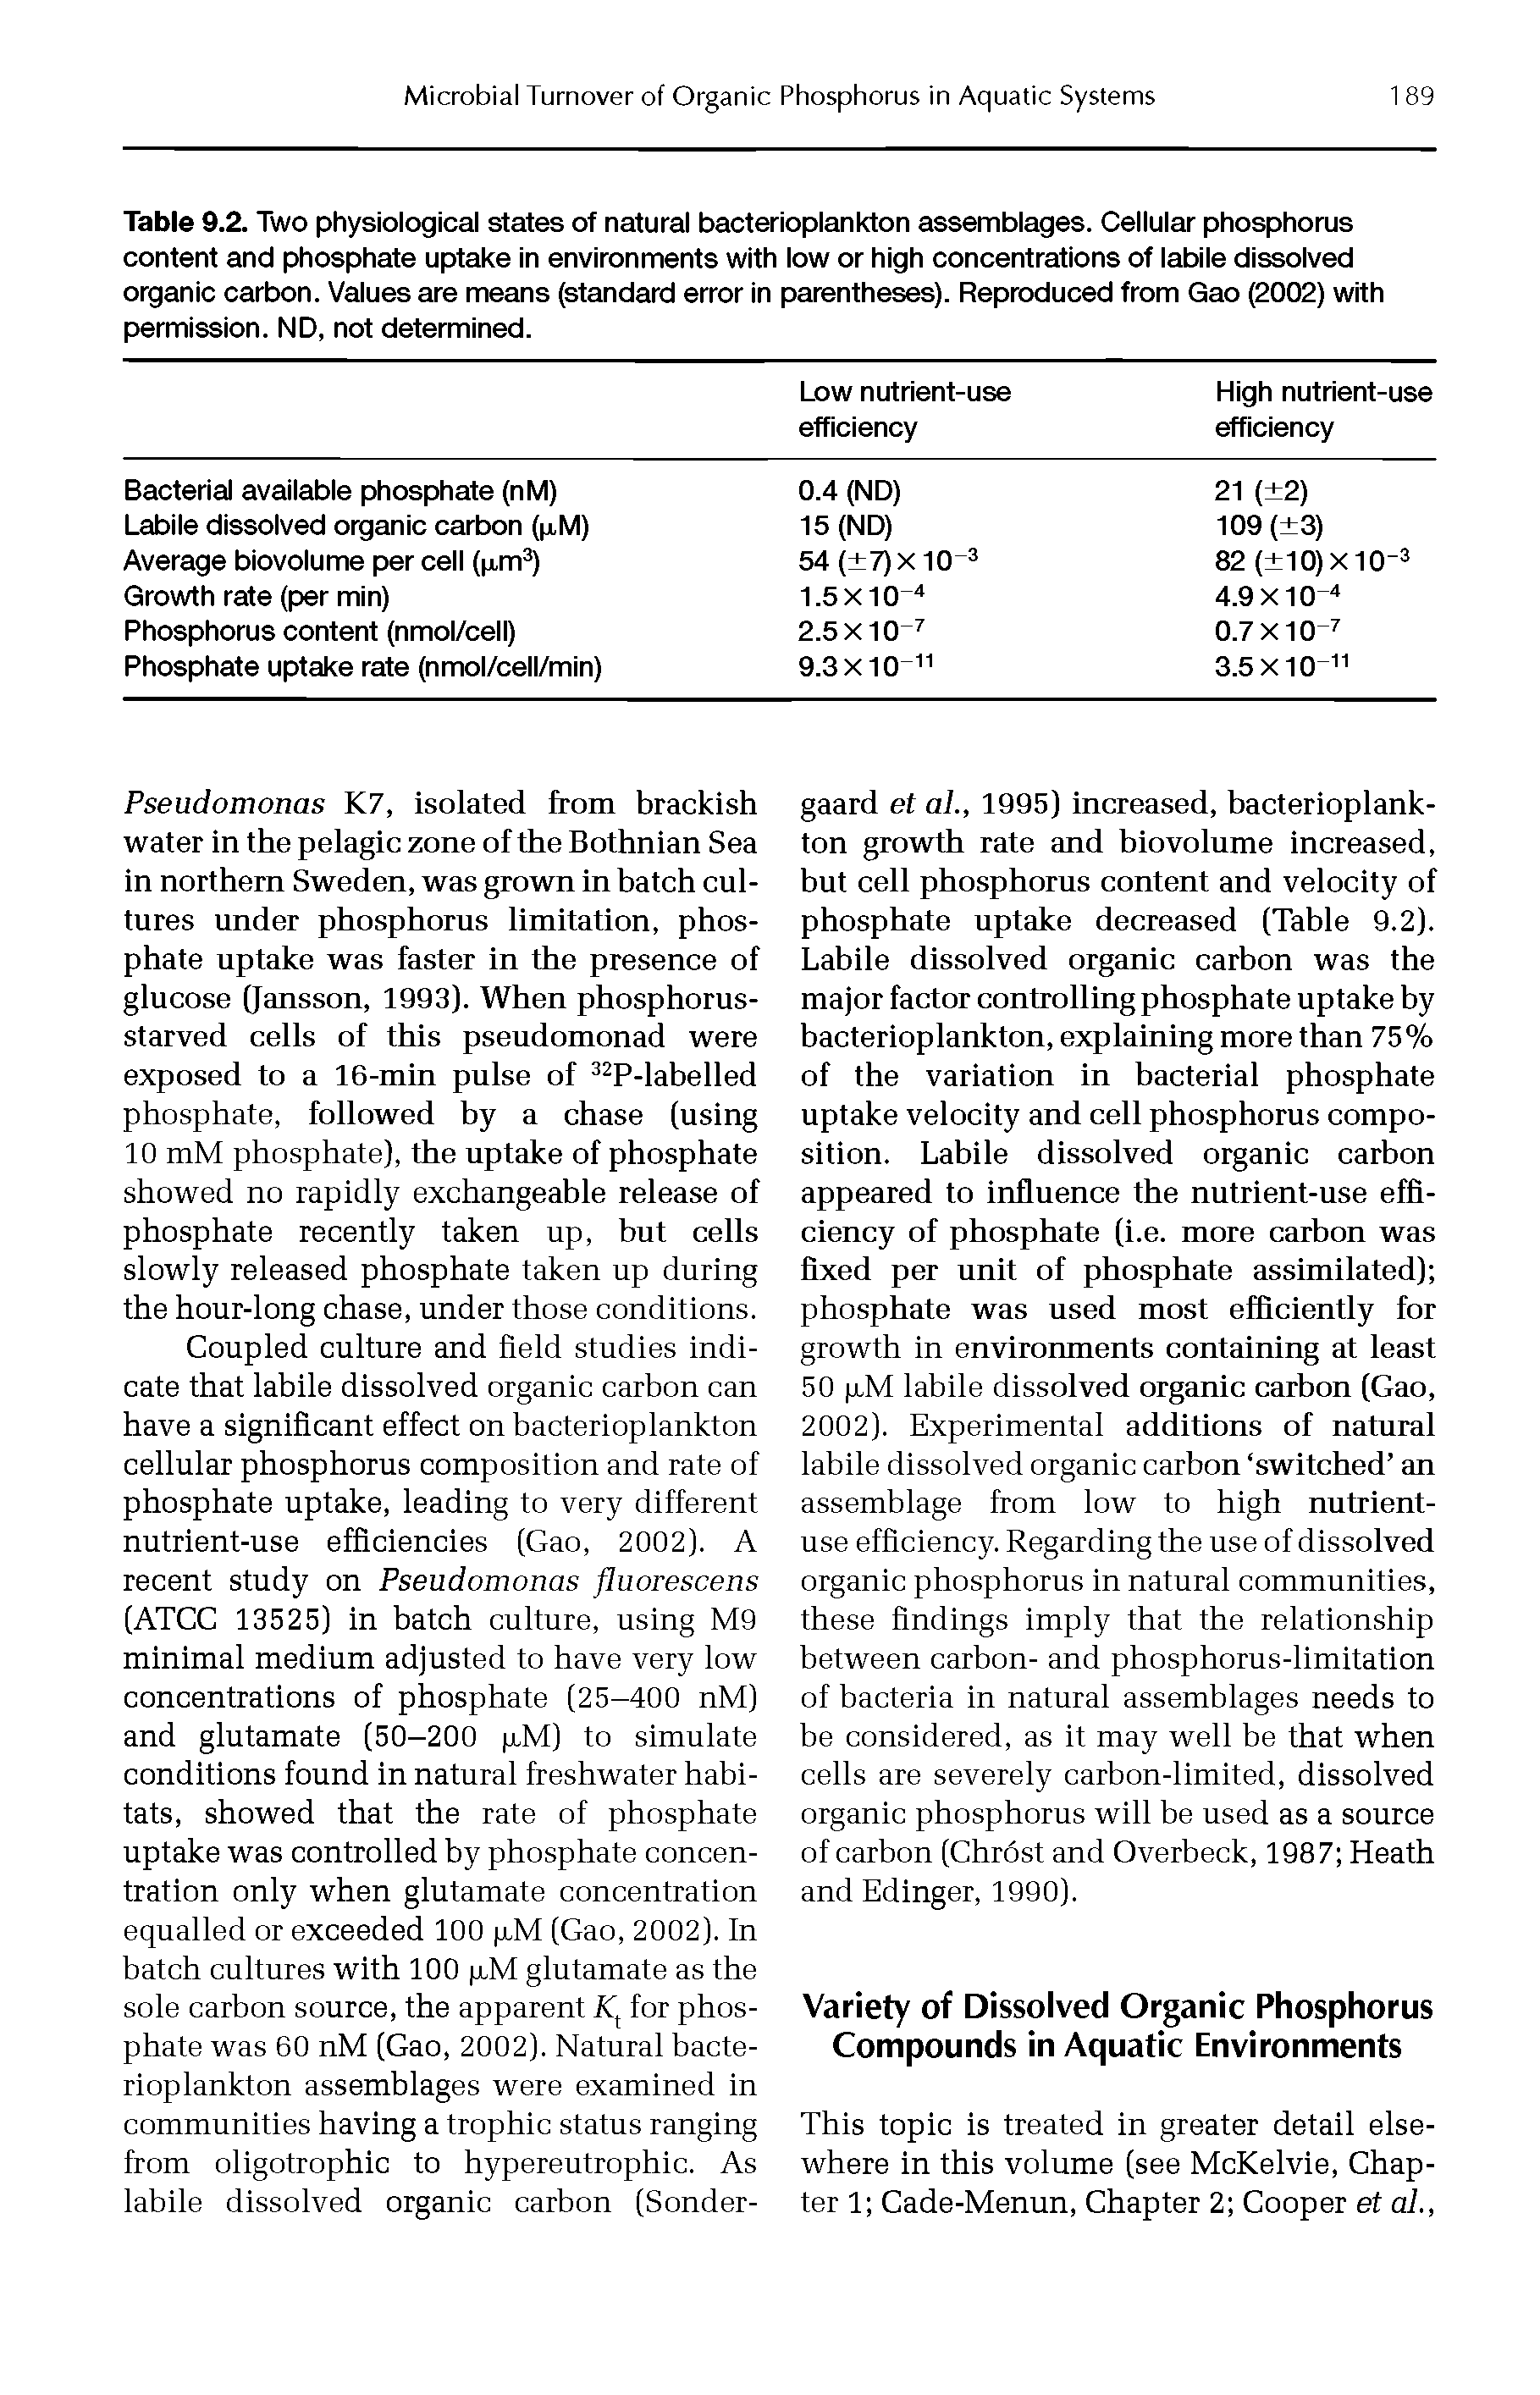 Table 9.2. Two physiological states of natural bacterioplankton assemblages. Cellular phosphorus content and phosphate uptake in environments with low or high concentrations of labile dissolved organic carbon. Values are means (standard error in parentheses). Reproduced from Gao (2002) with permission. ND, not determined.